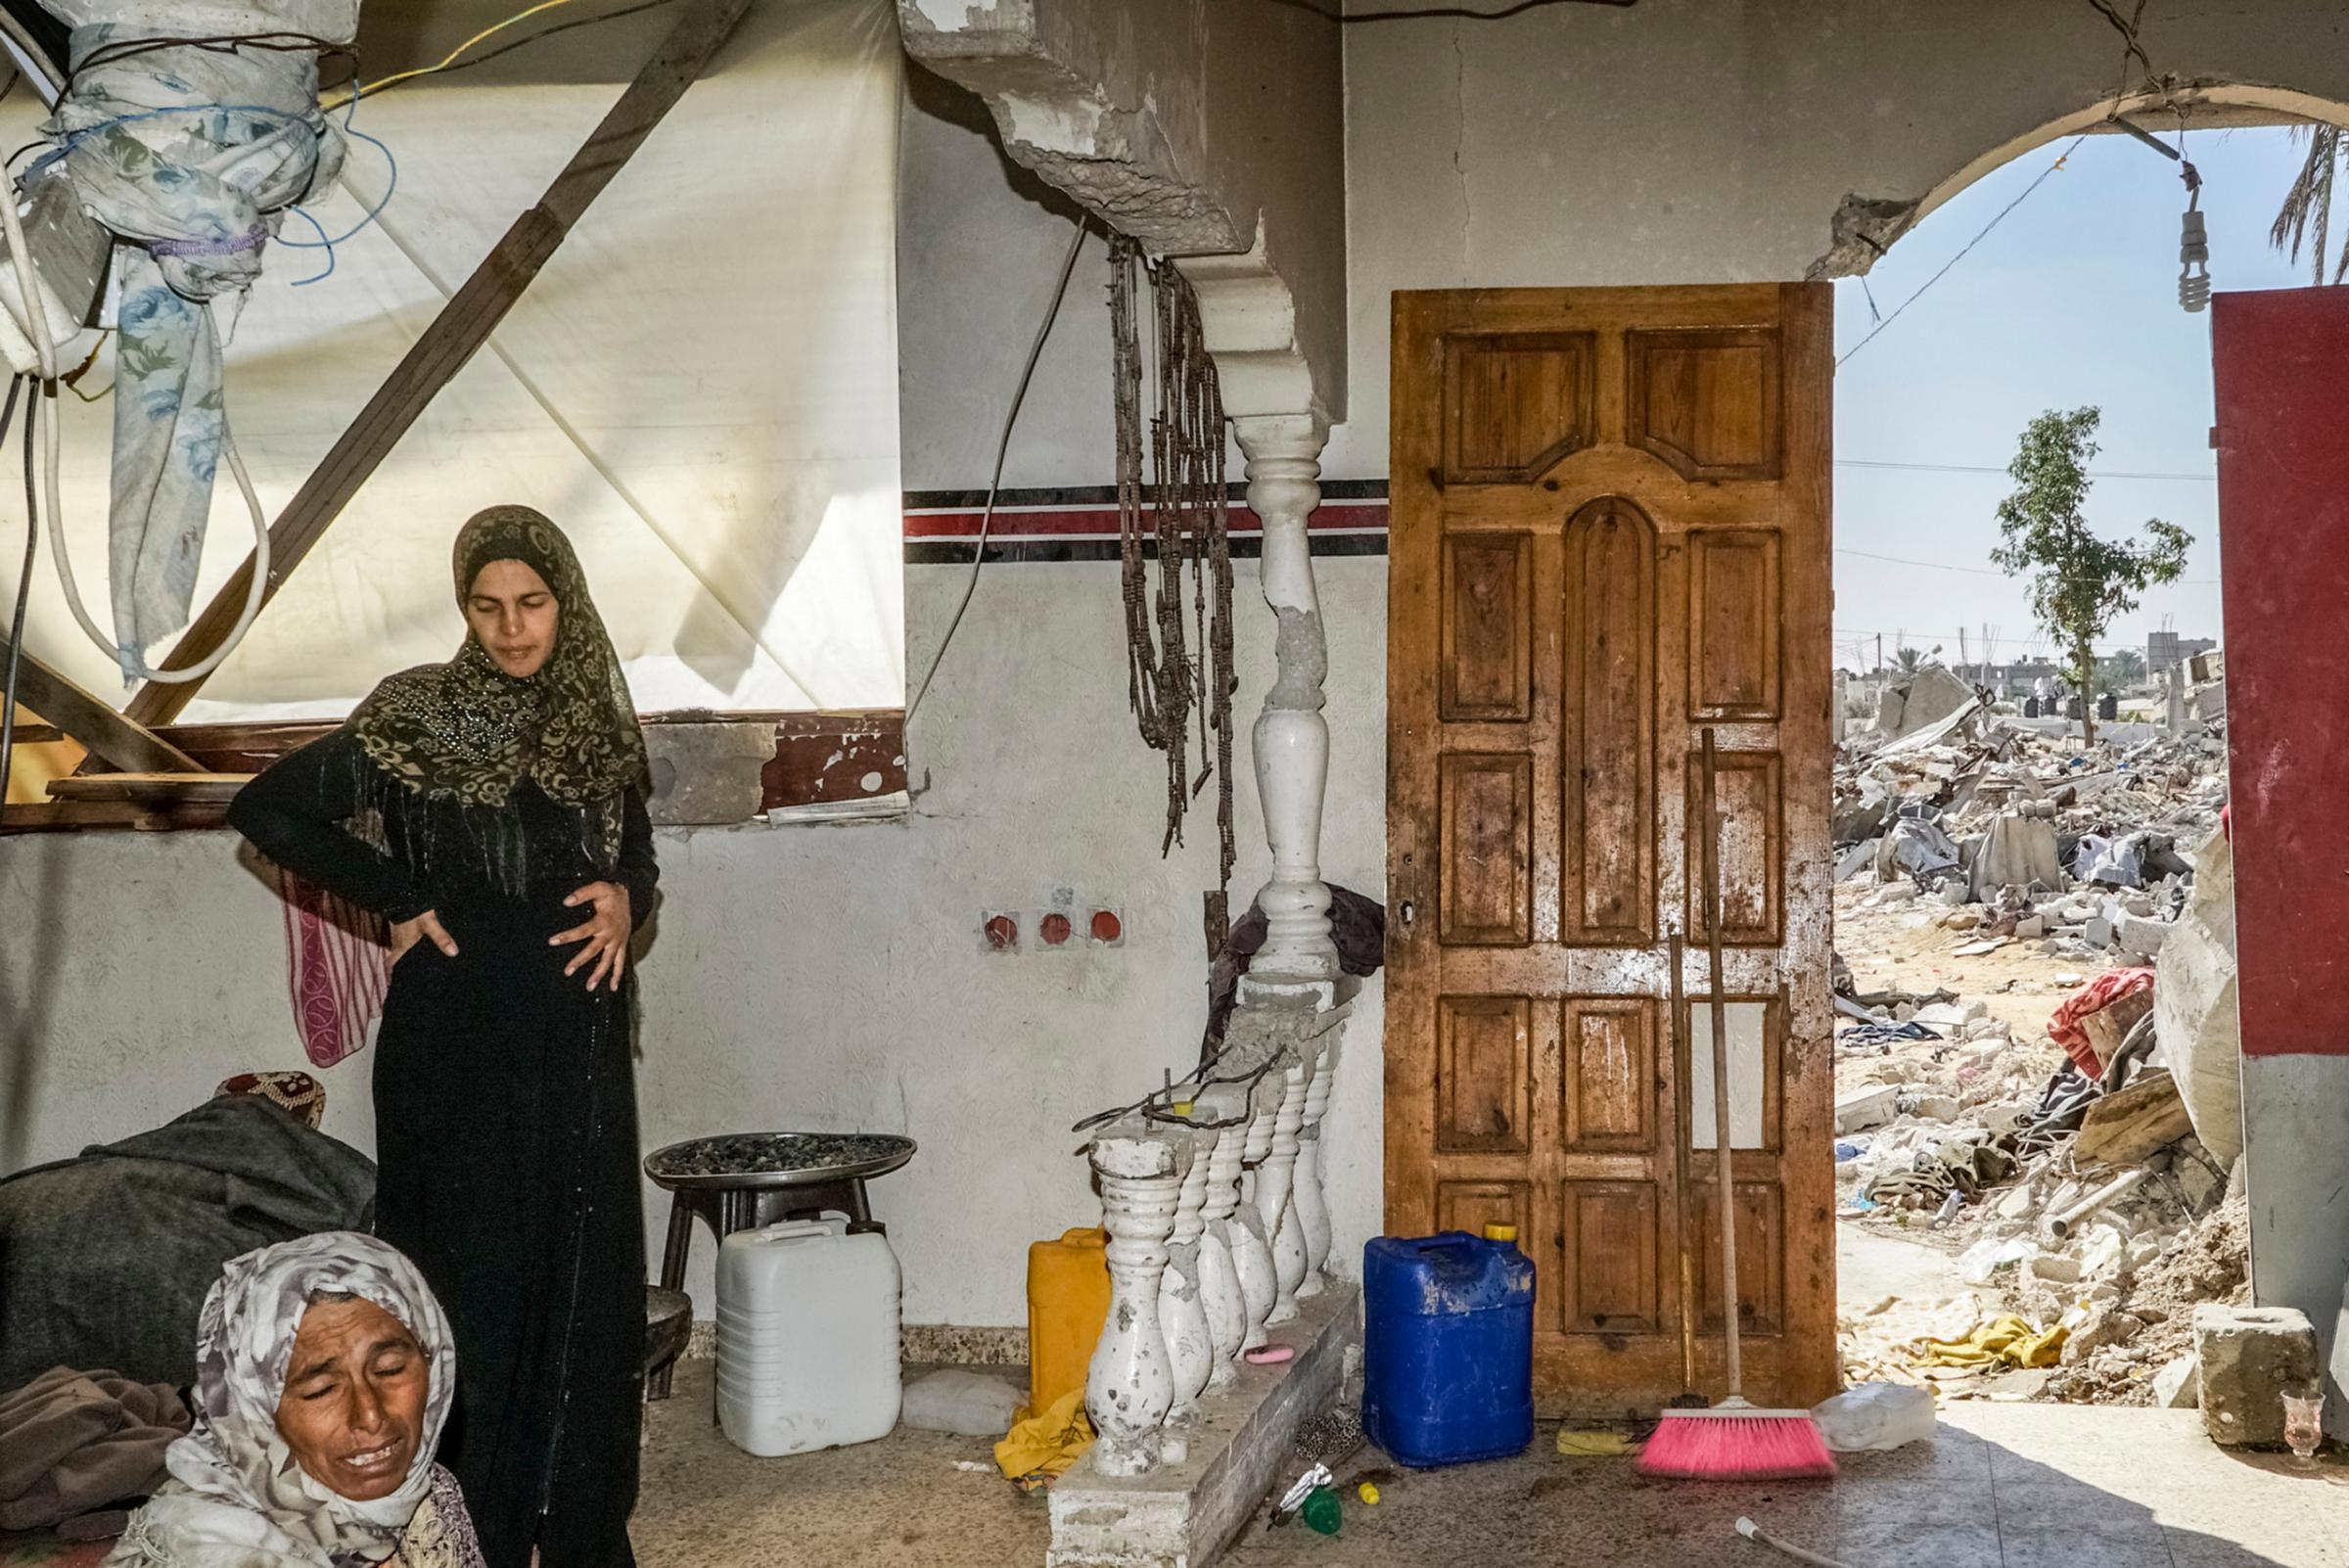 2014.  Gaza.  Palestine.The Najar family in their destroyed home.    Operation Protective Edge lasted from 8 July 2014 – 26 August 2014, killing 2,189 Palestinians of which 1,486 are believed to be civilians. 66 Israeli soldiers and 6 civilians were killed.  It's estimated that 4,564 rockets were fired at Israel by Palestinian militants.